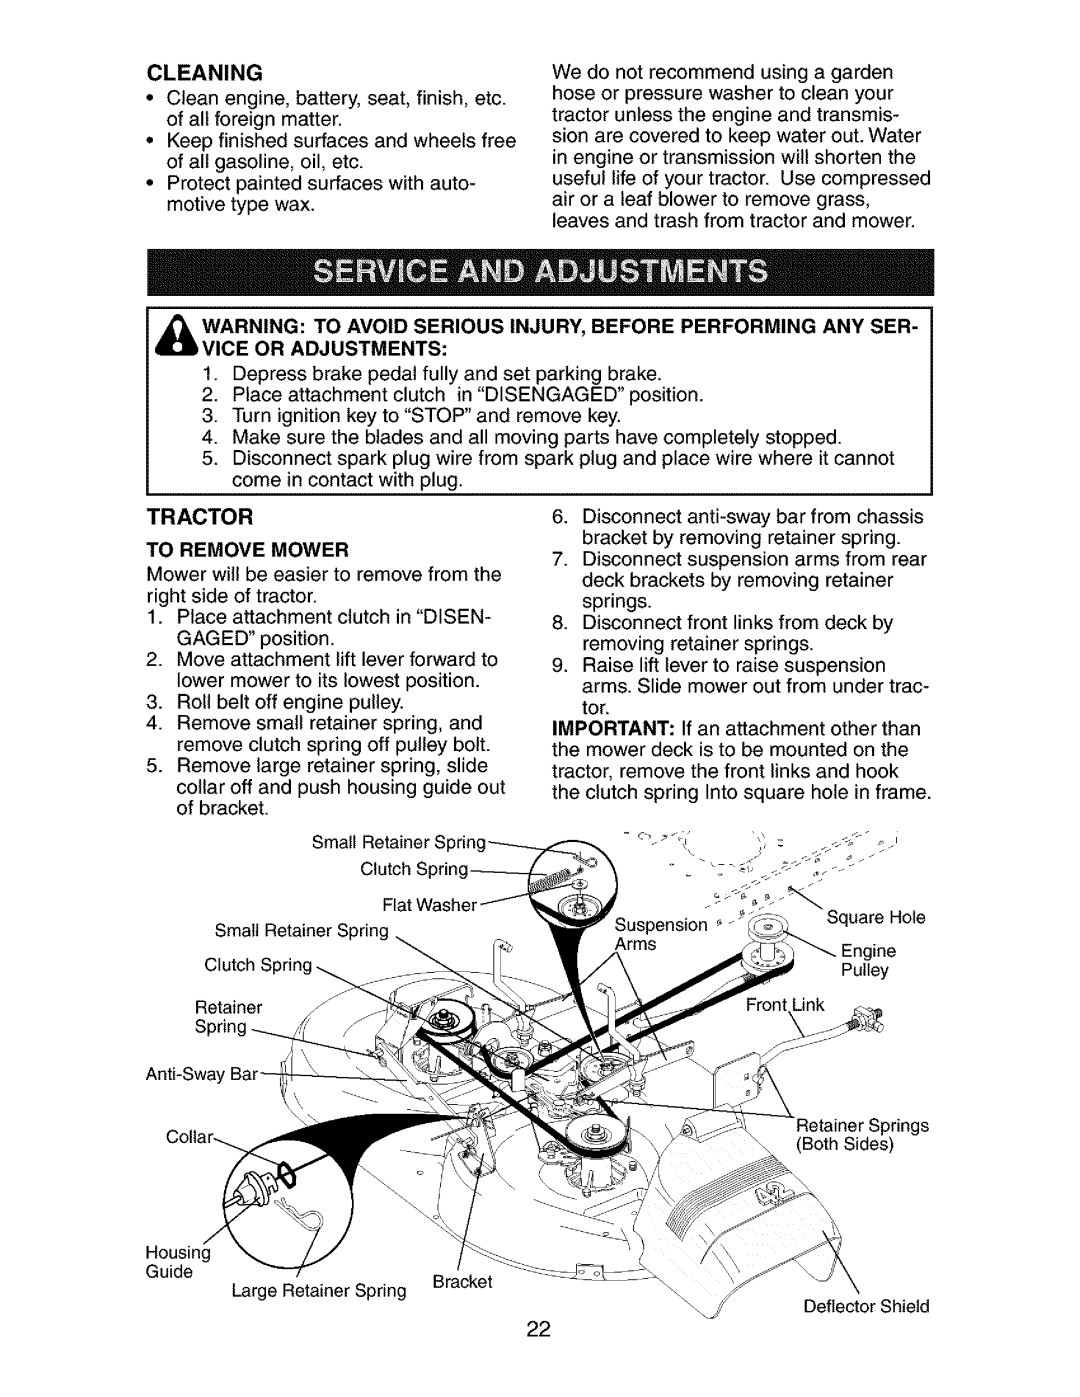 Craftsman 917.273481 manual Tractor, Cleaning, To Remove Mower 